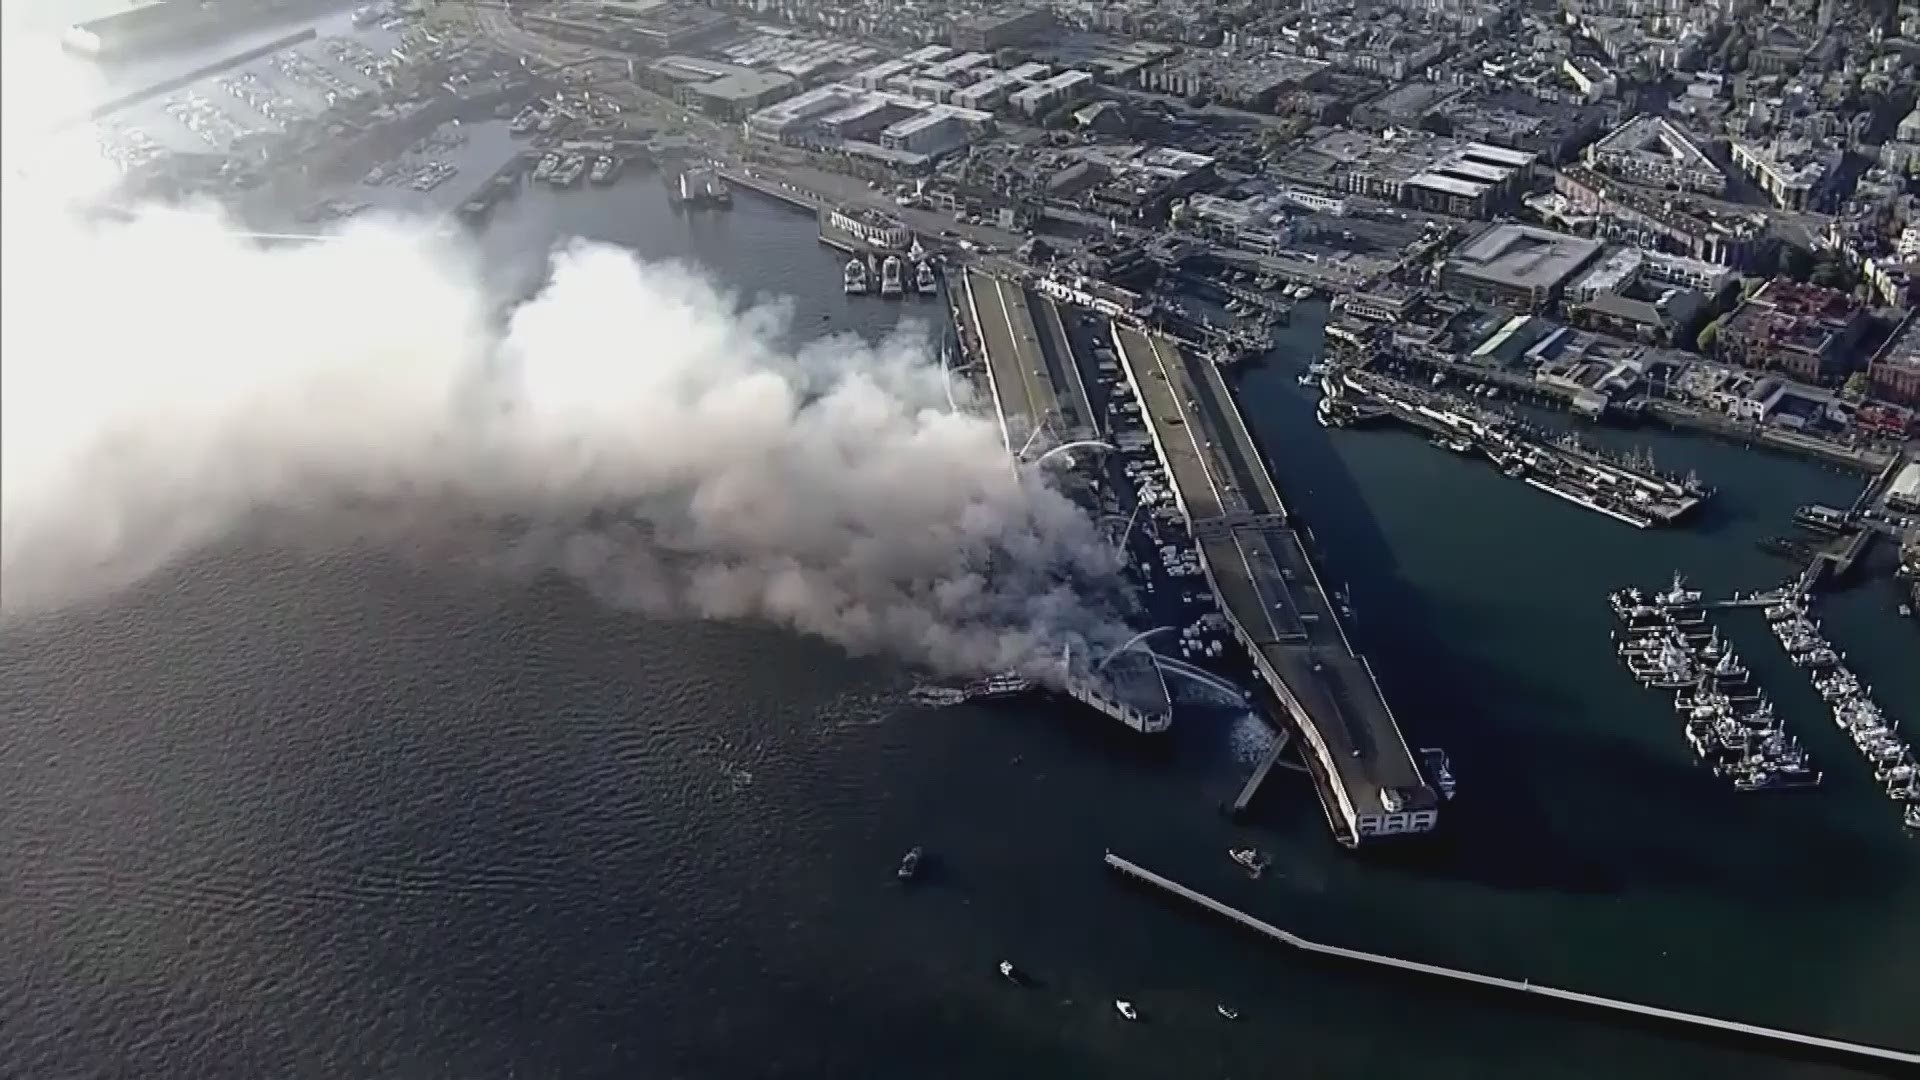 More than 100 firefighters rushed to battle towering flames in the iconic section of San Francisco.